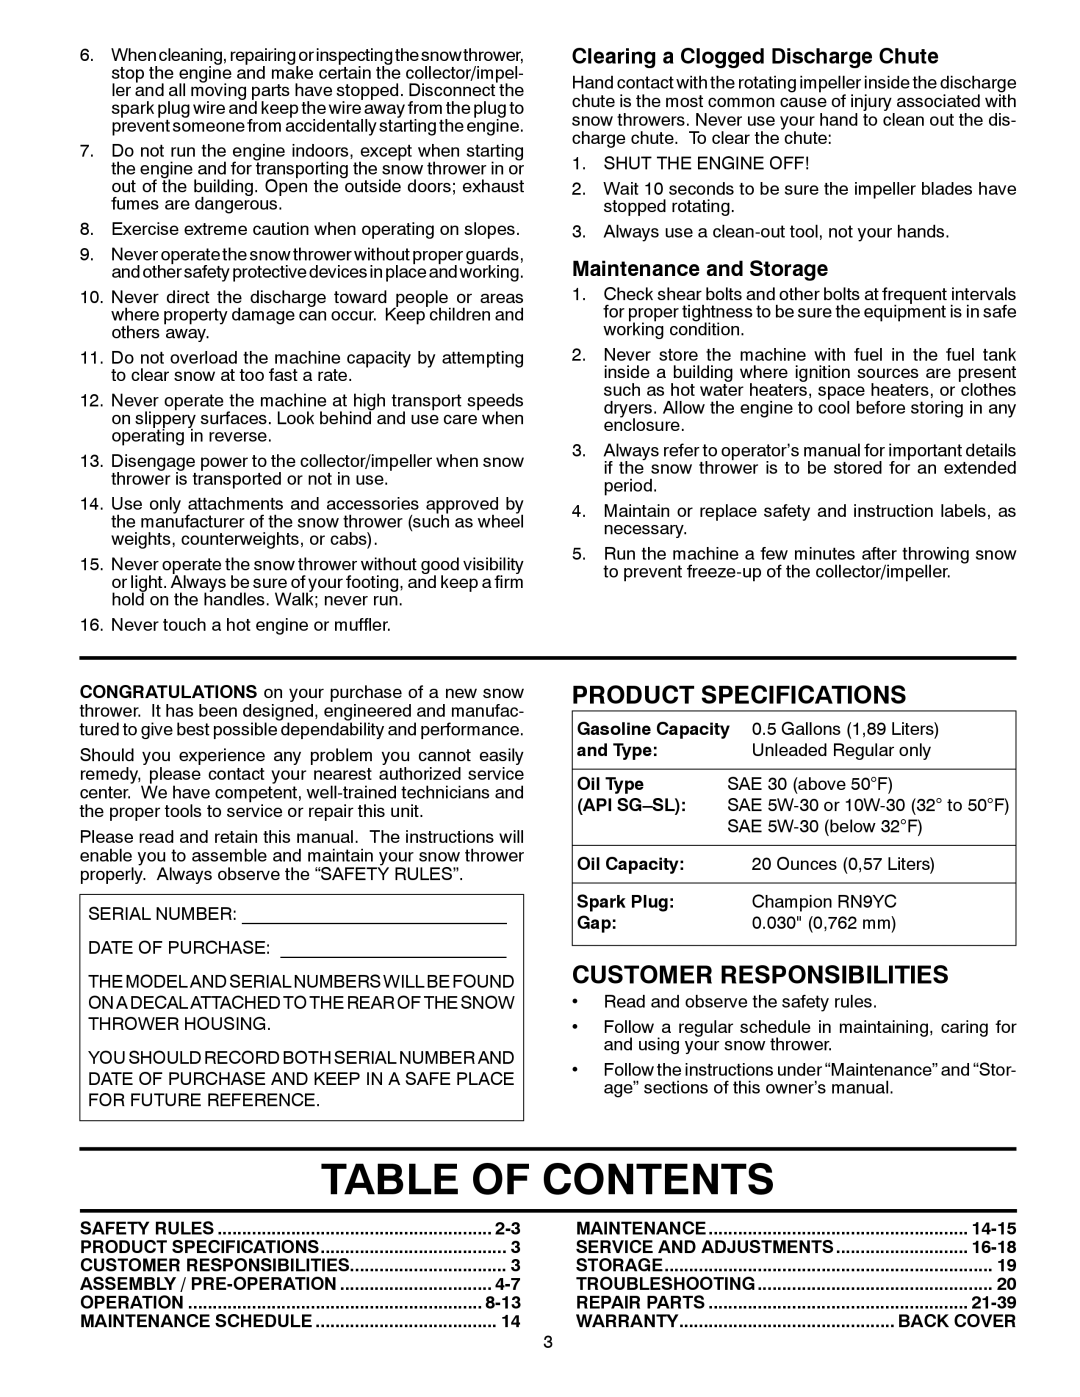 Poulan PR1330ES Table Of Contents, Product Specifications, Customer Responsibilities, Clearing a Clogged Discharge Chute 